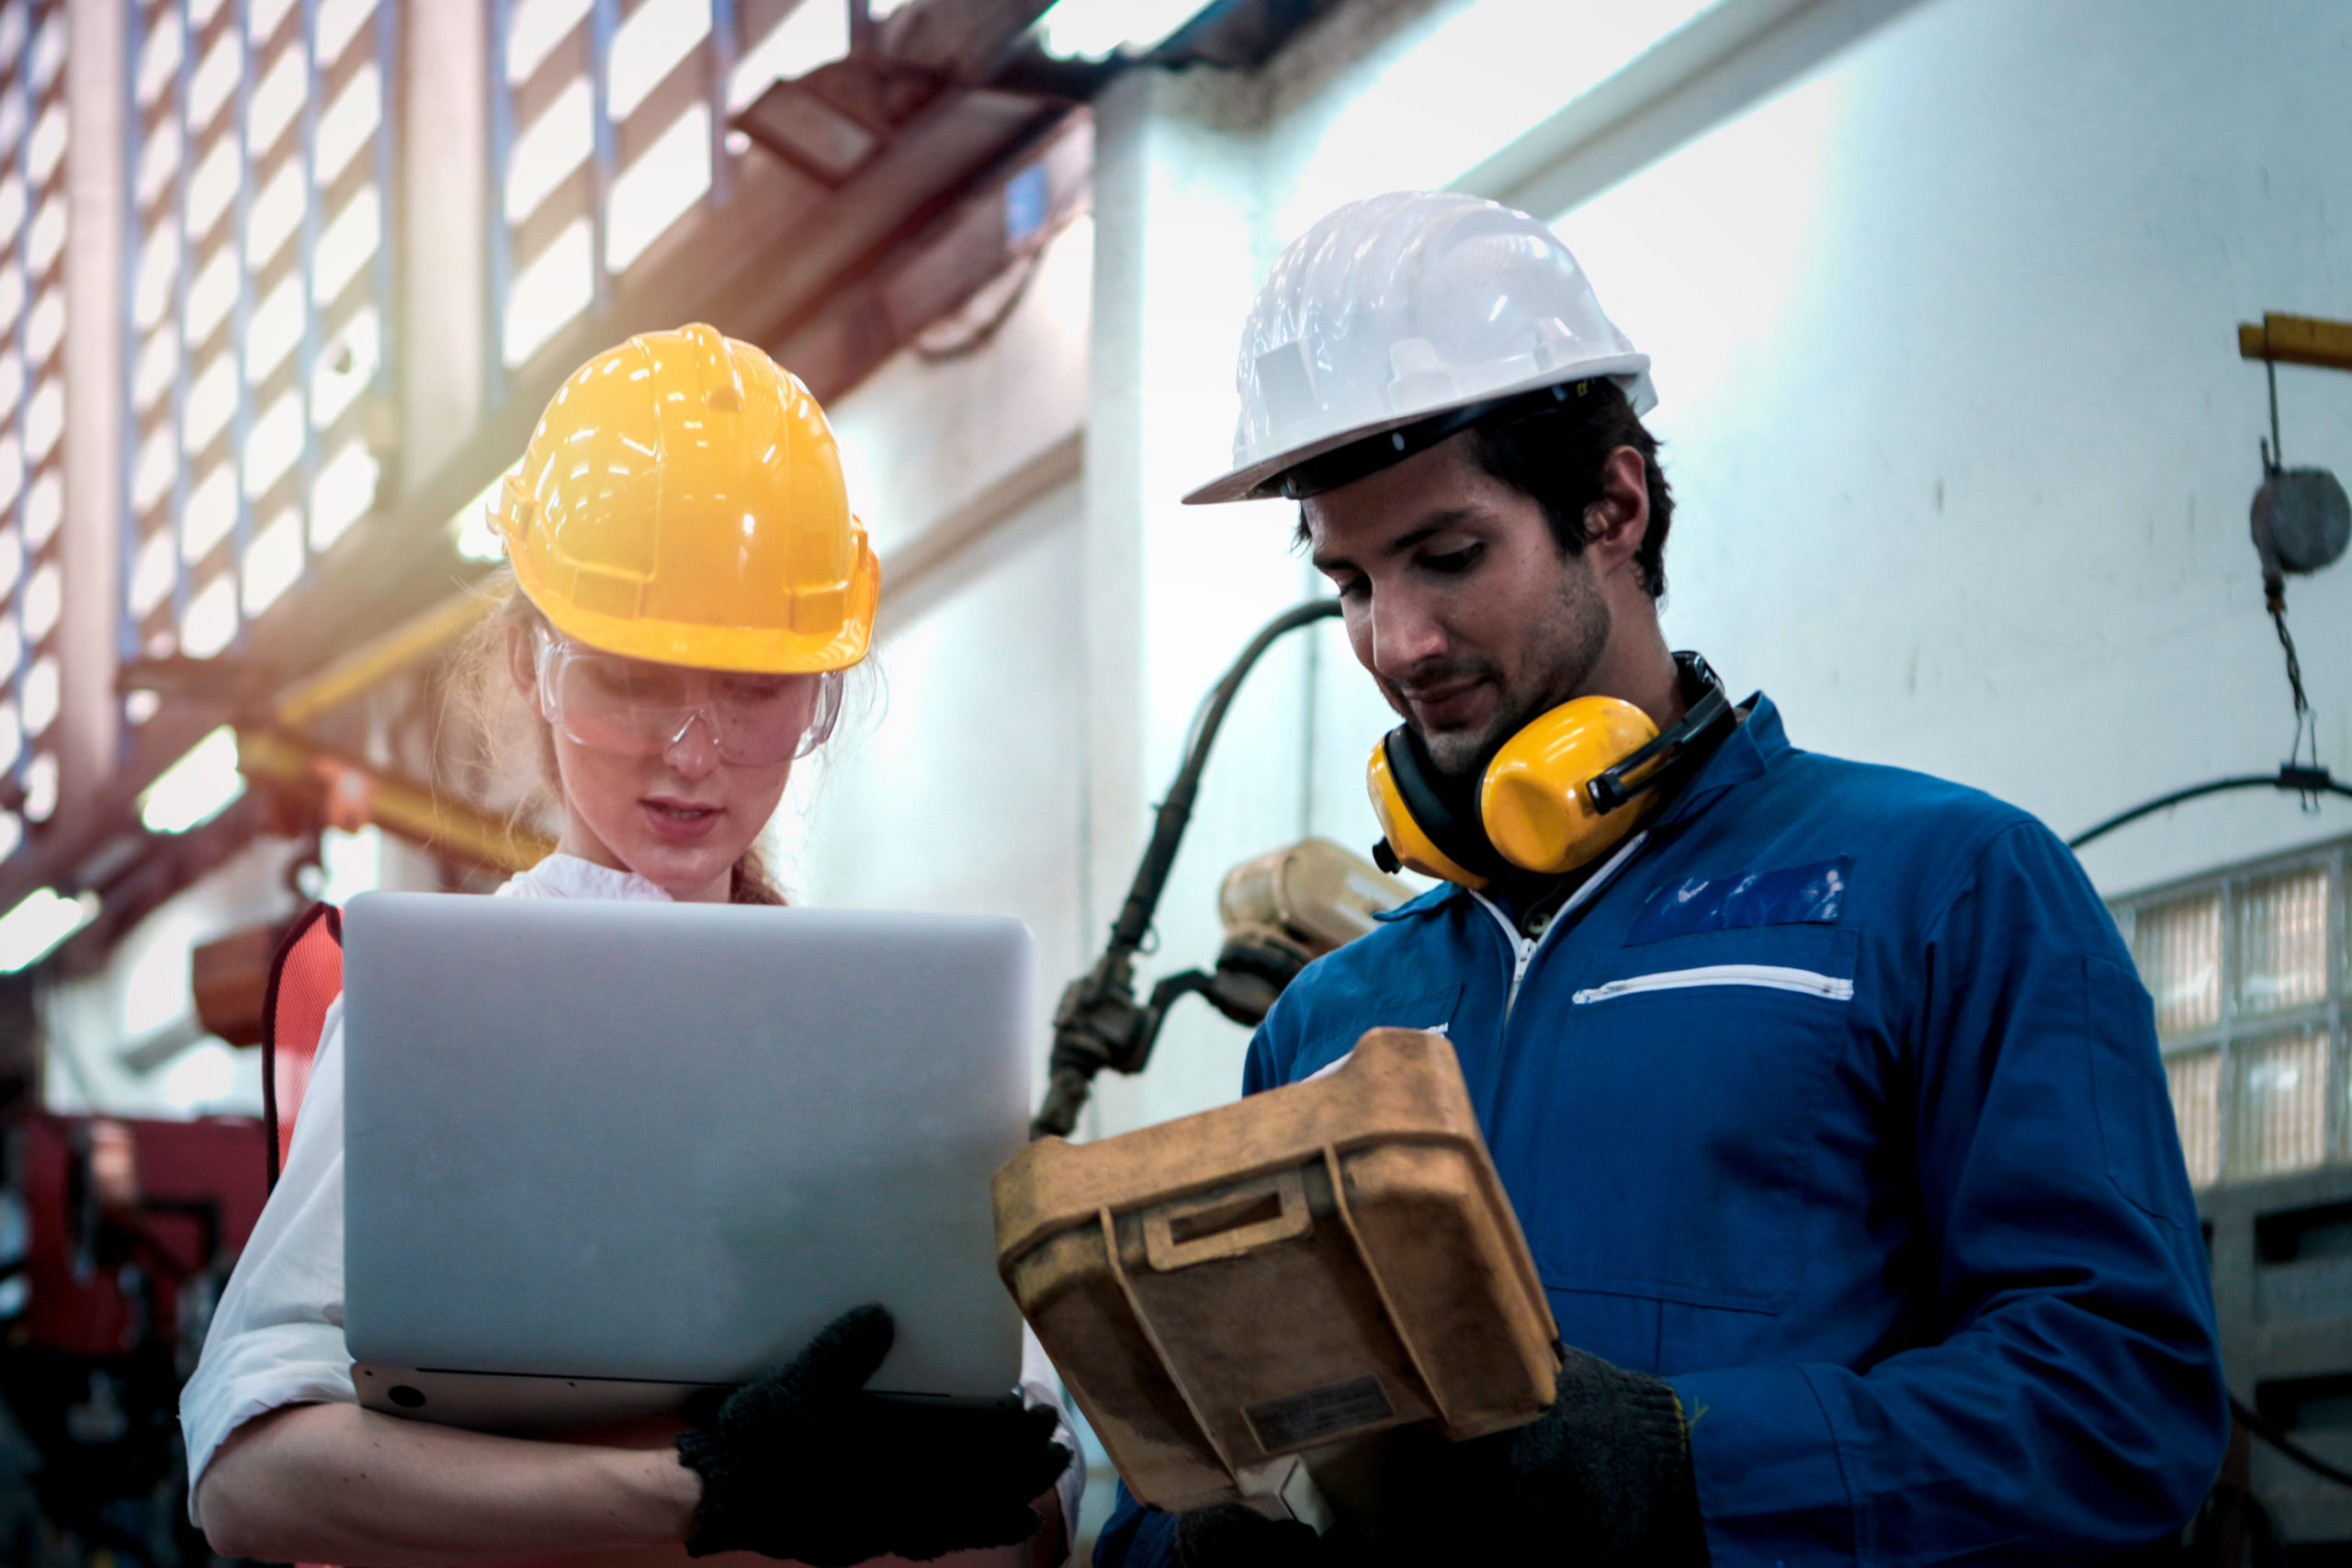 Woman and man wearing hard hats are discussing work at a manufacturing facility